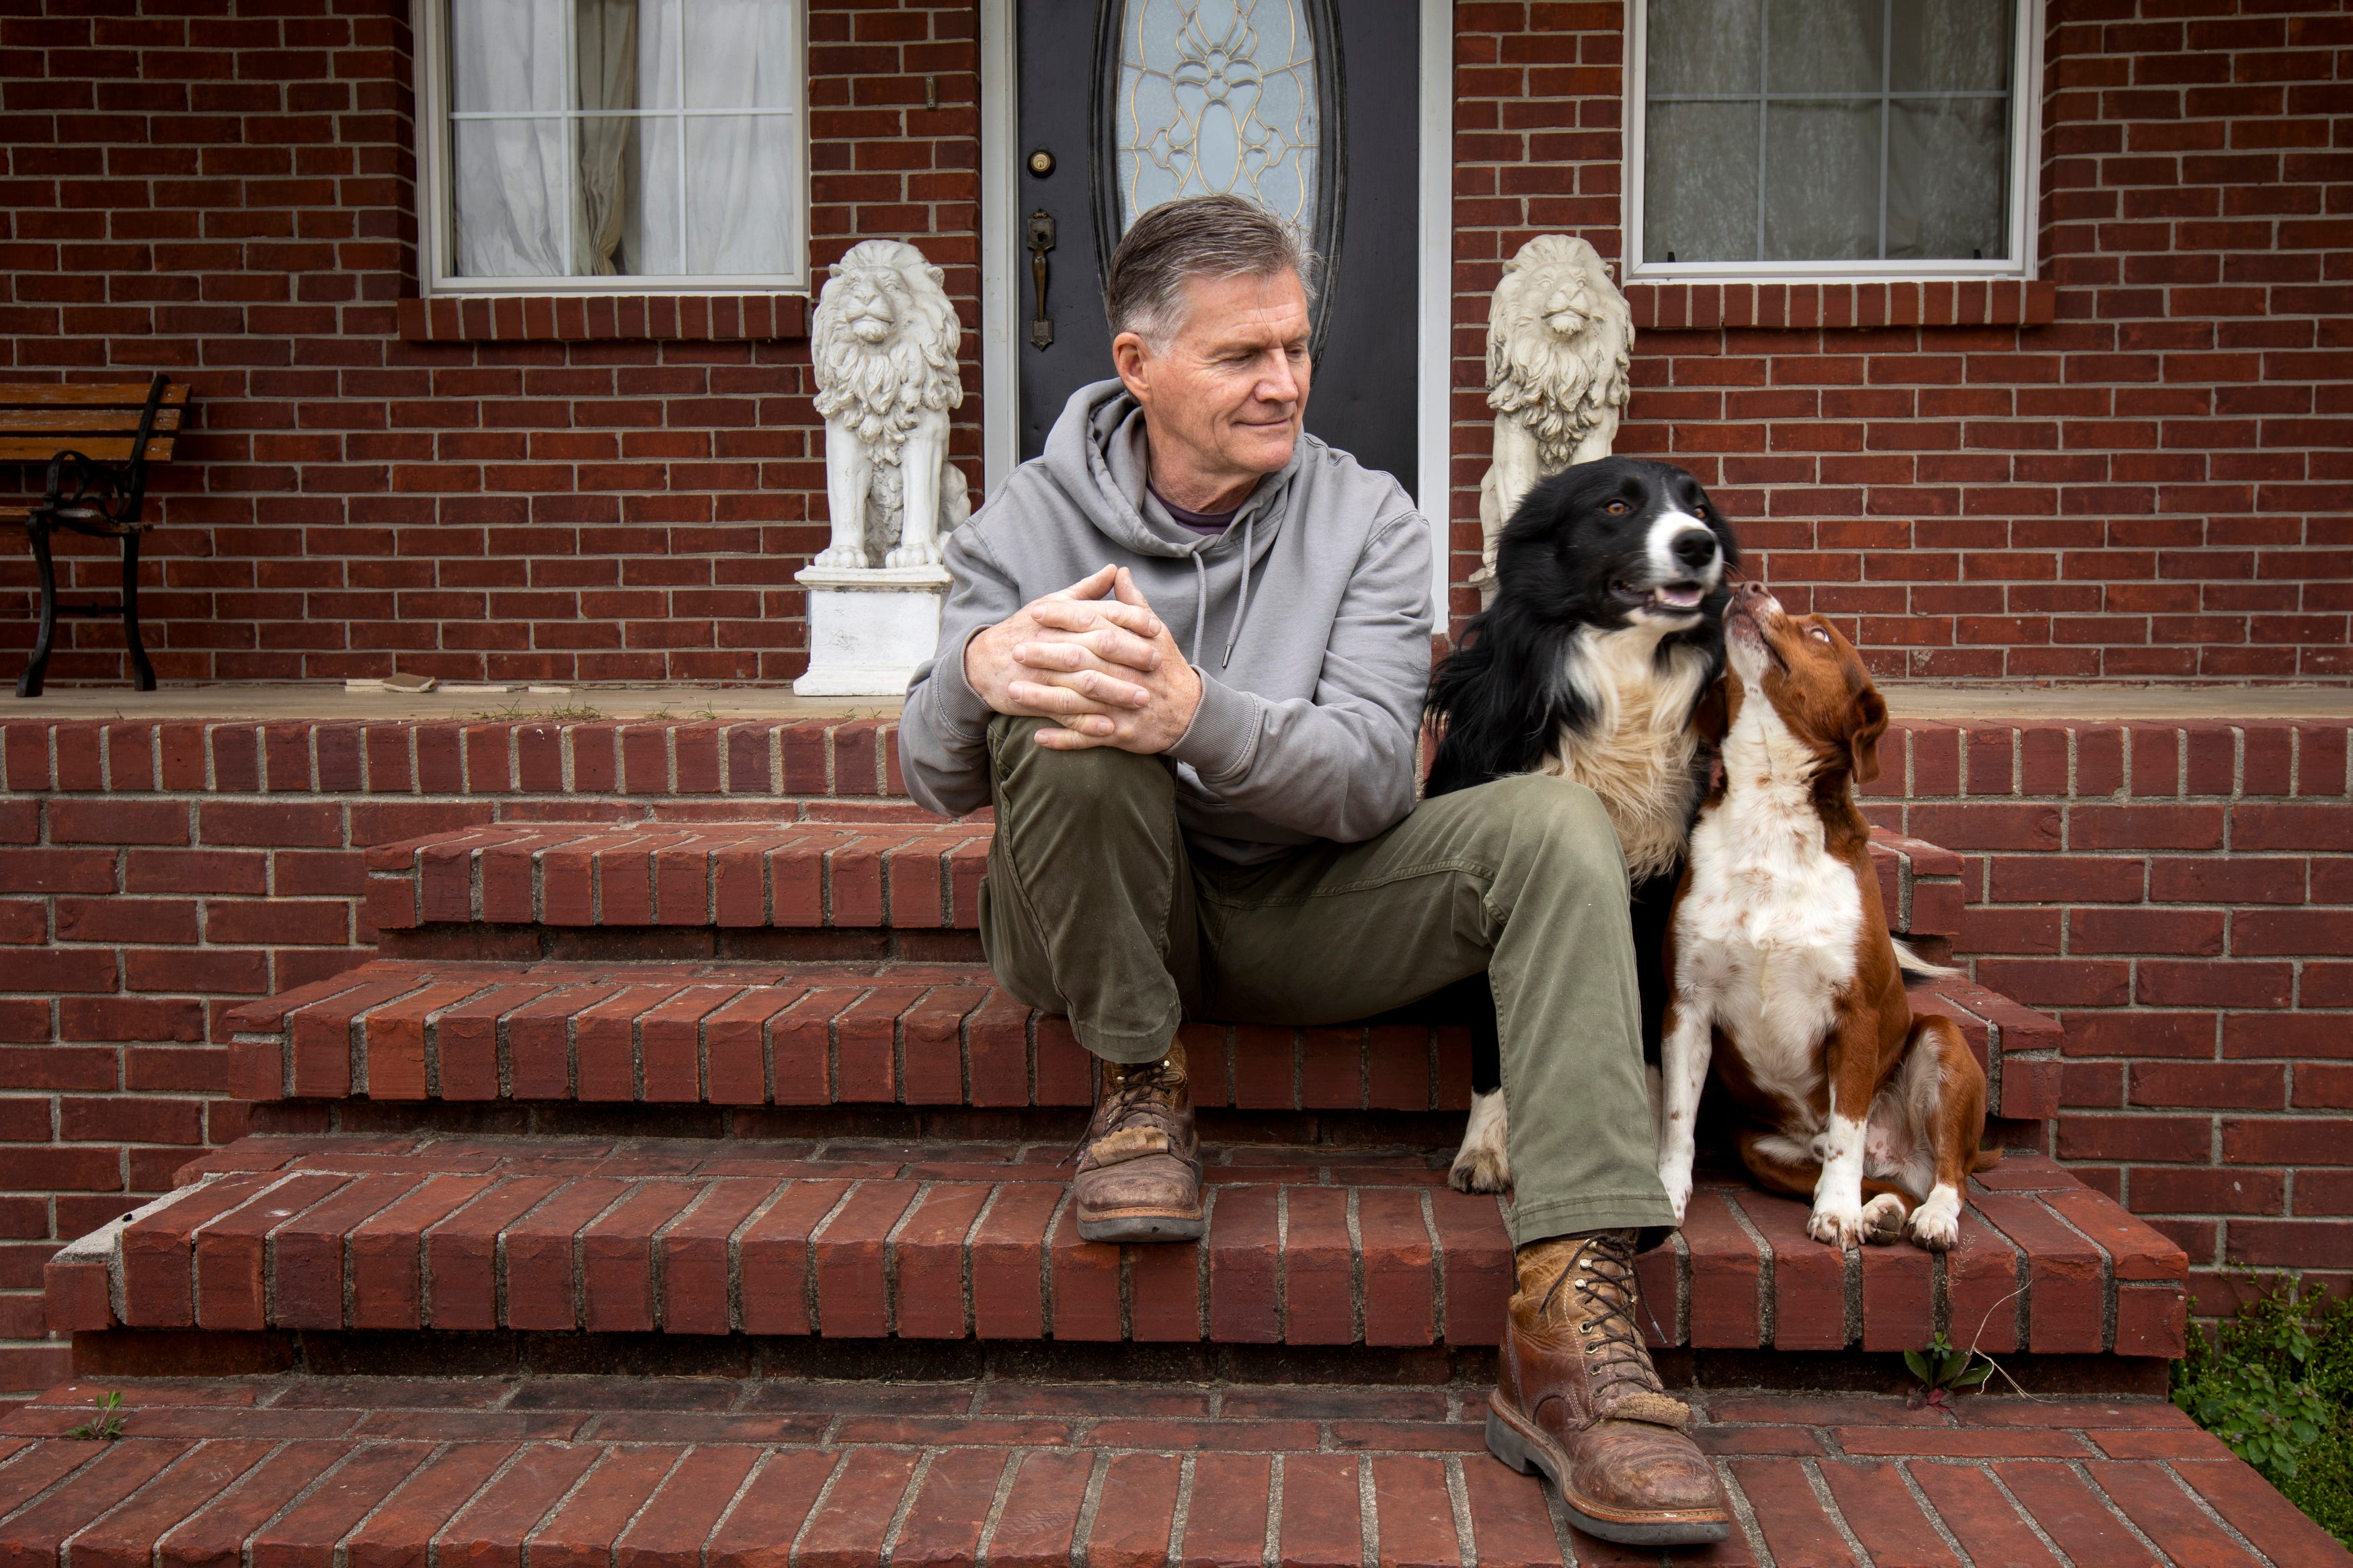 Mark McAlister sits outside his home with his dogs on Friday, March 25, 2022, in Greenfield, Tenn. He reflects on how much has happened in the last six years since being released from prison in Yemen. "From that point on, from October 20, 2015, just our lives had changed. It made my children grow up a lot."